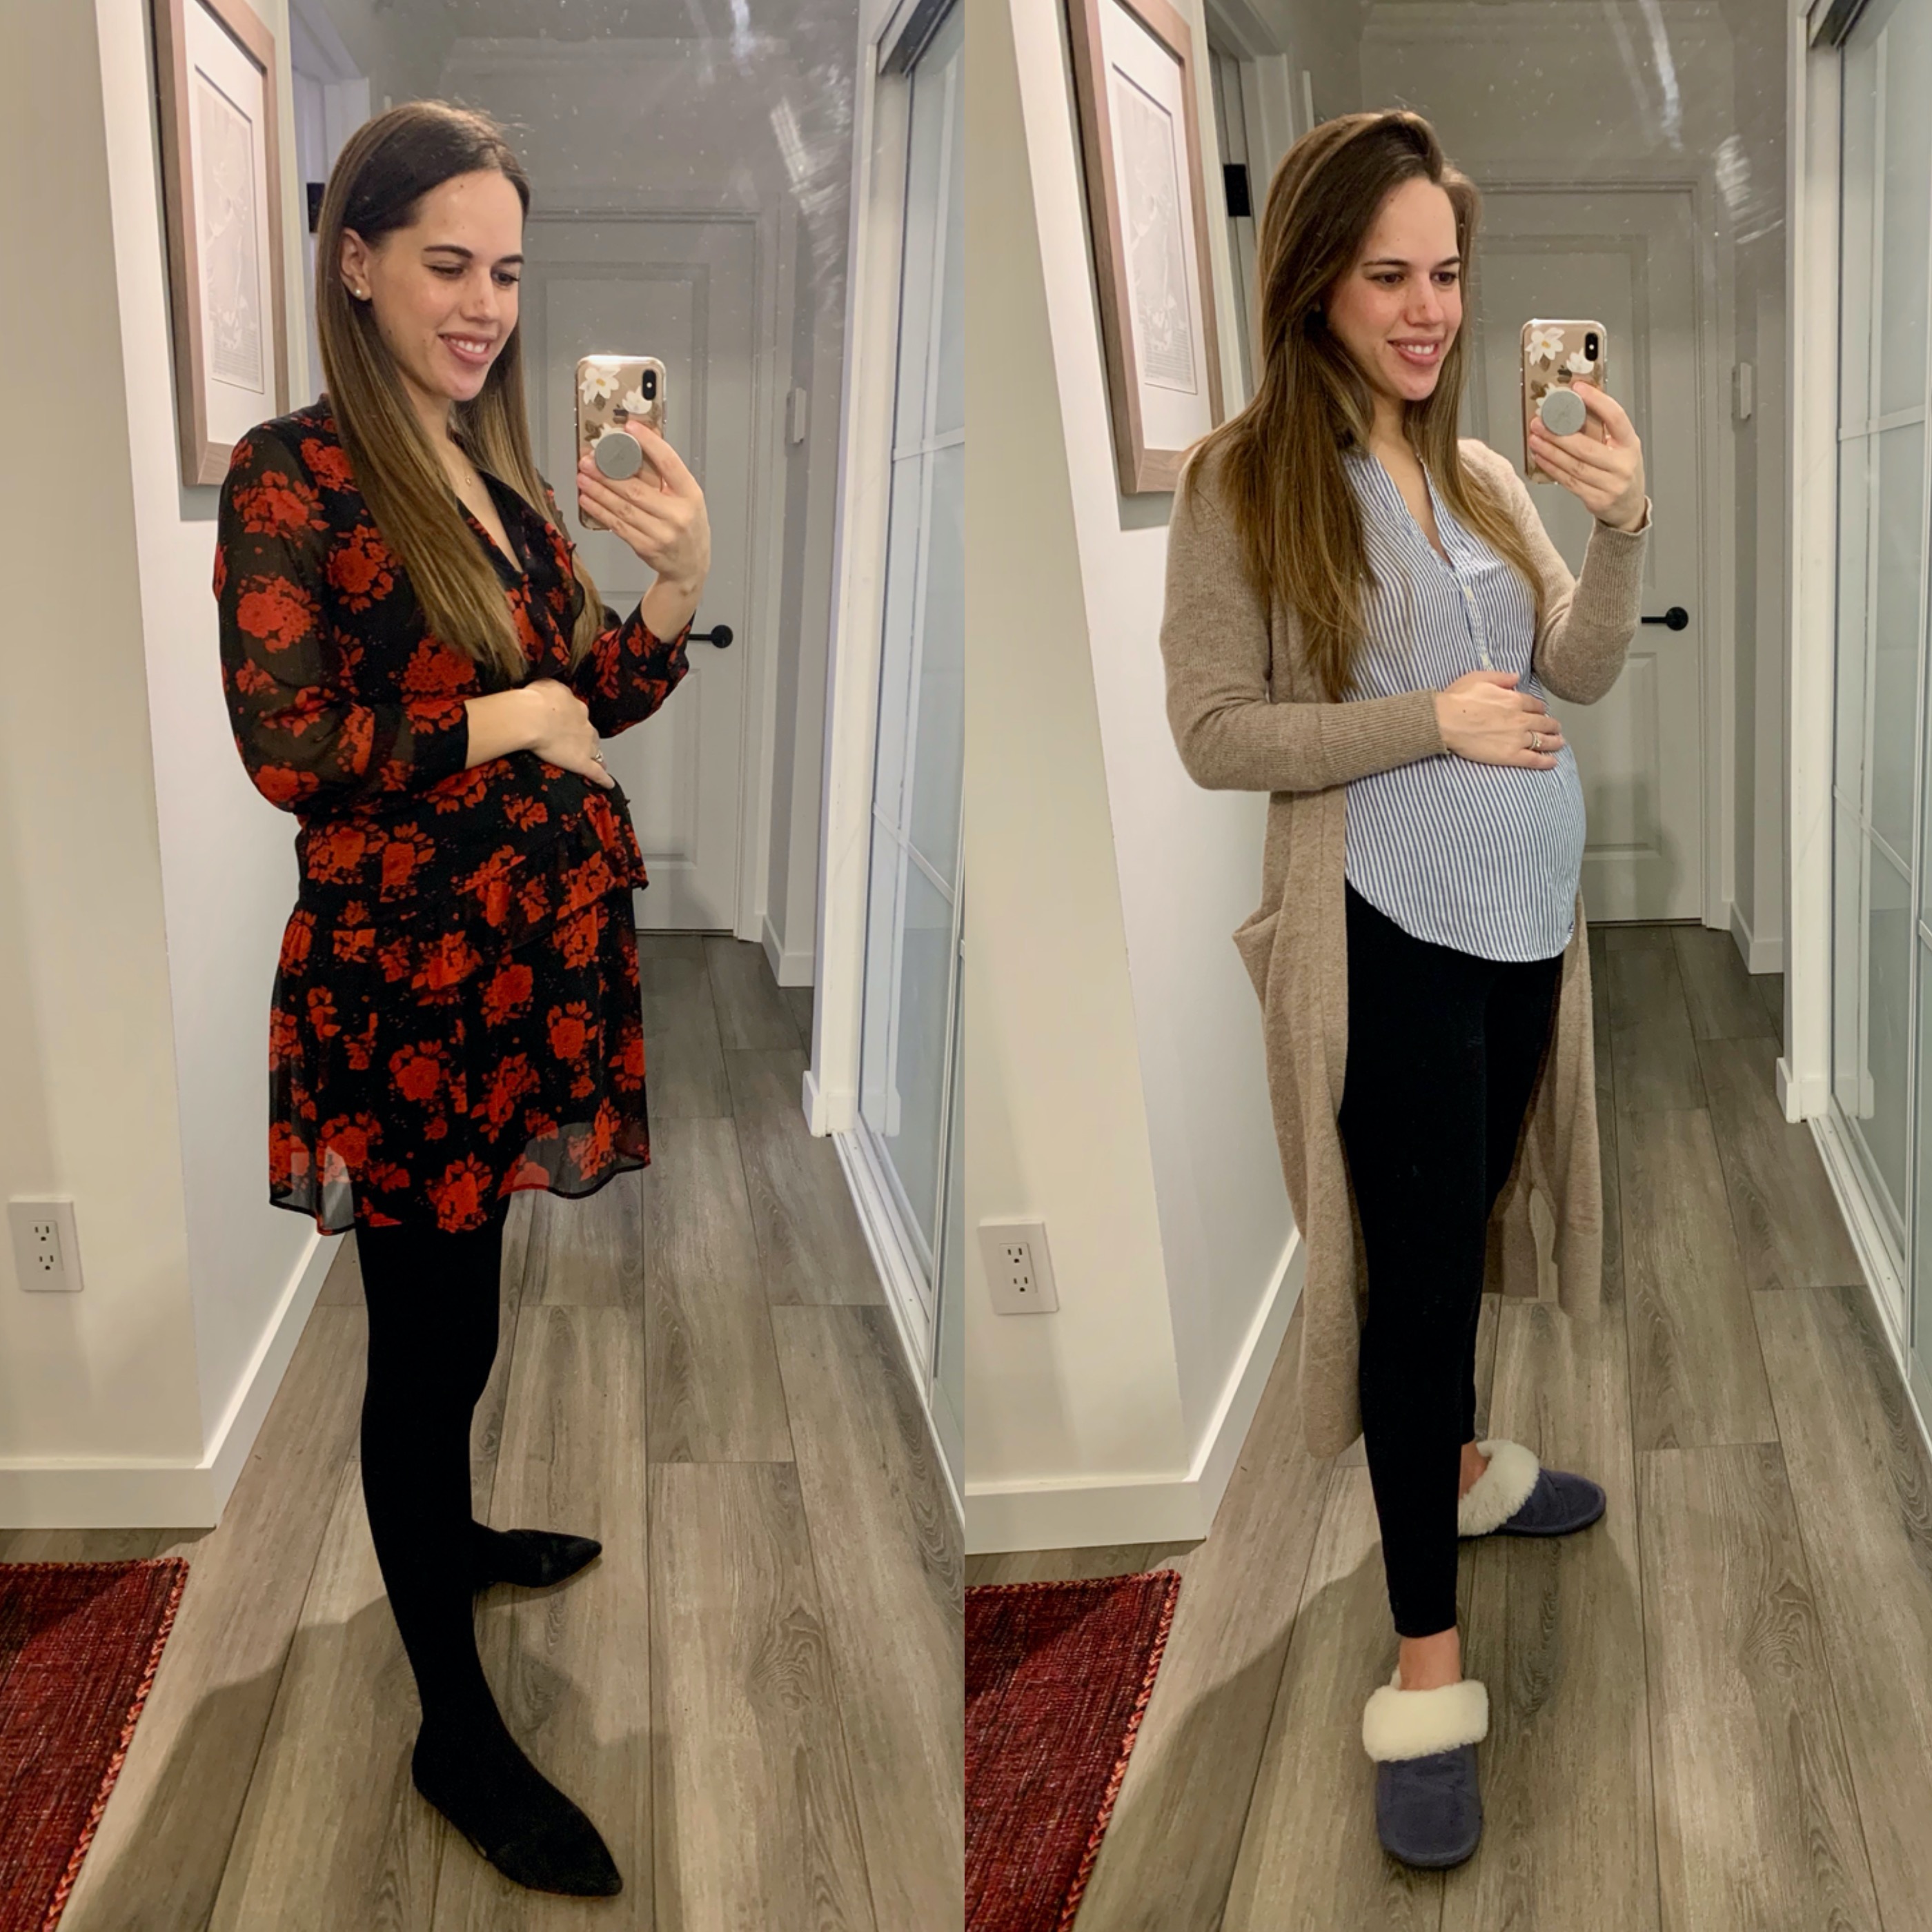 Jules in Flats - What I Wore to Work in January (Business Casual Workwear on a Budget) Week 2